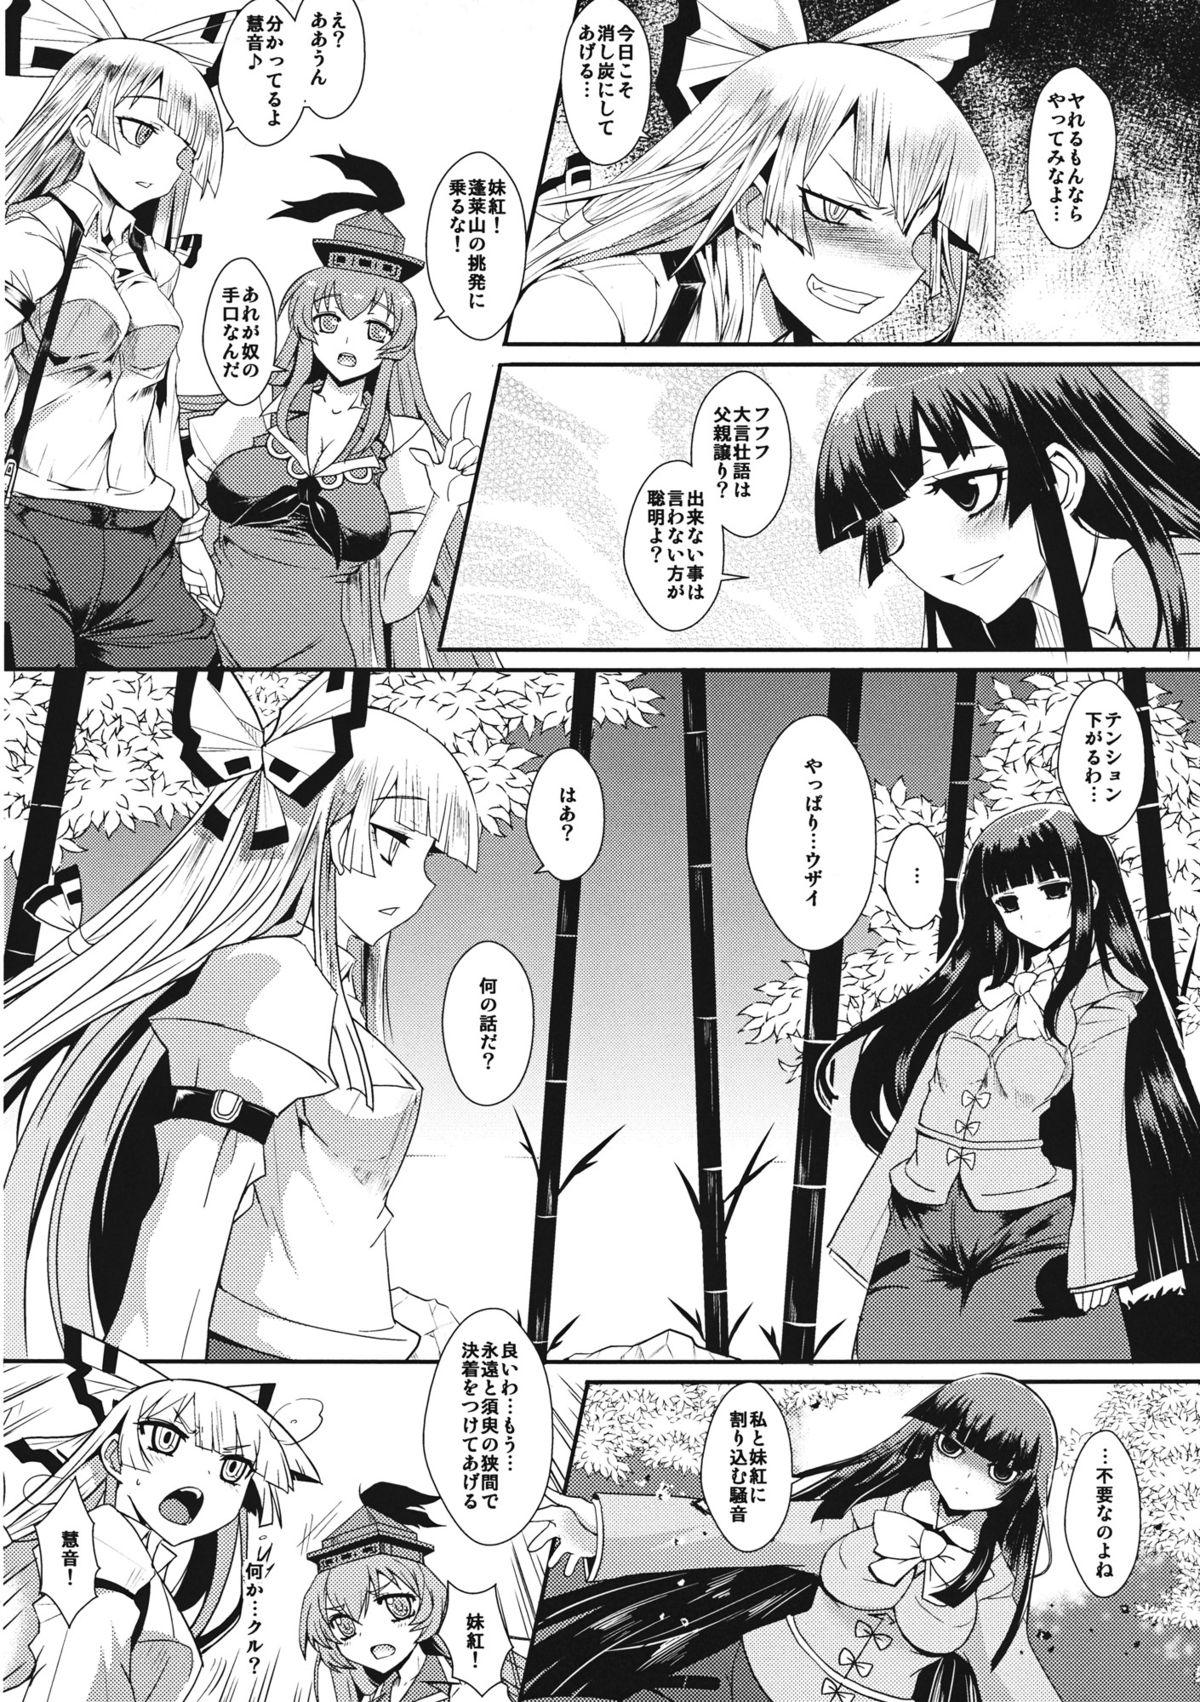 Rough Sex 紅月の二重奏 - Touhou project Mulher - Page 3